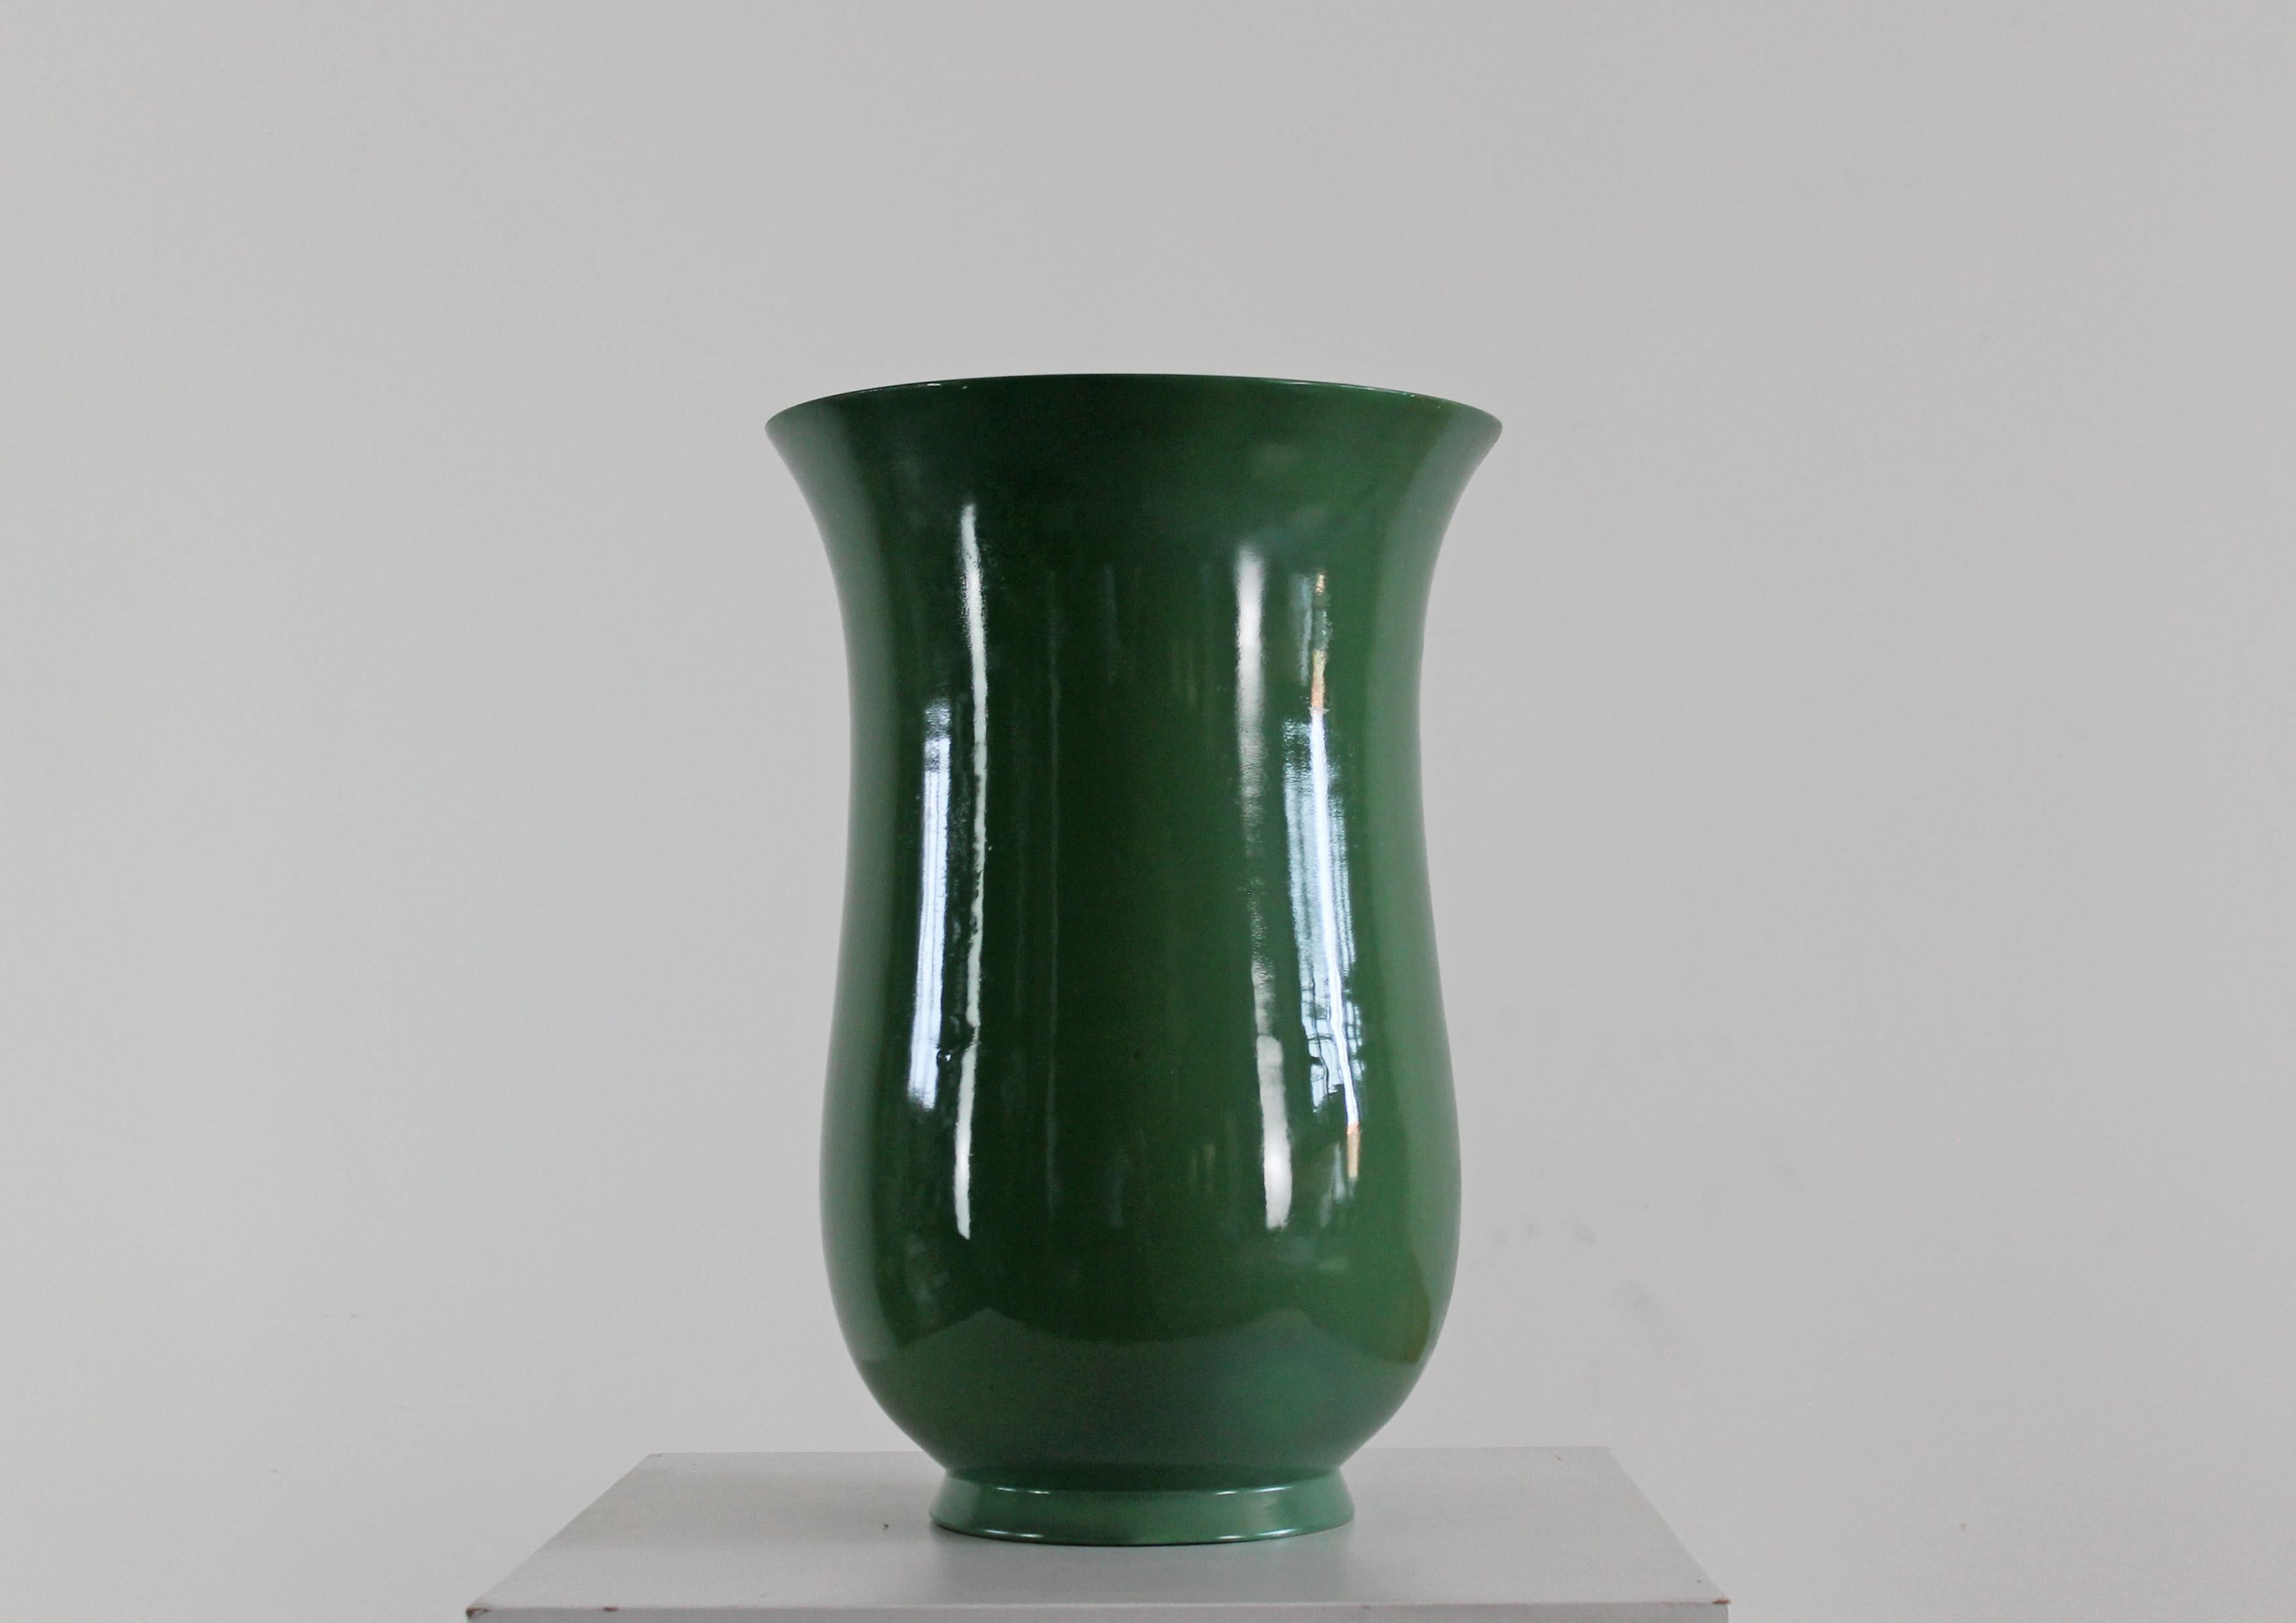 Large vase in green ceramic designed by the Italian designer Gio Ponti and manufactured by Richard Ginori between the 1930s and the 1940s. 

In this piece, the ceramic was modeled with an elegant and raffinate, flared shape that makes it a perfect